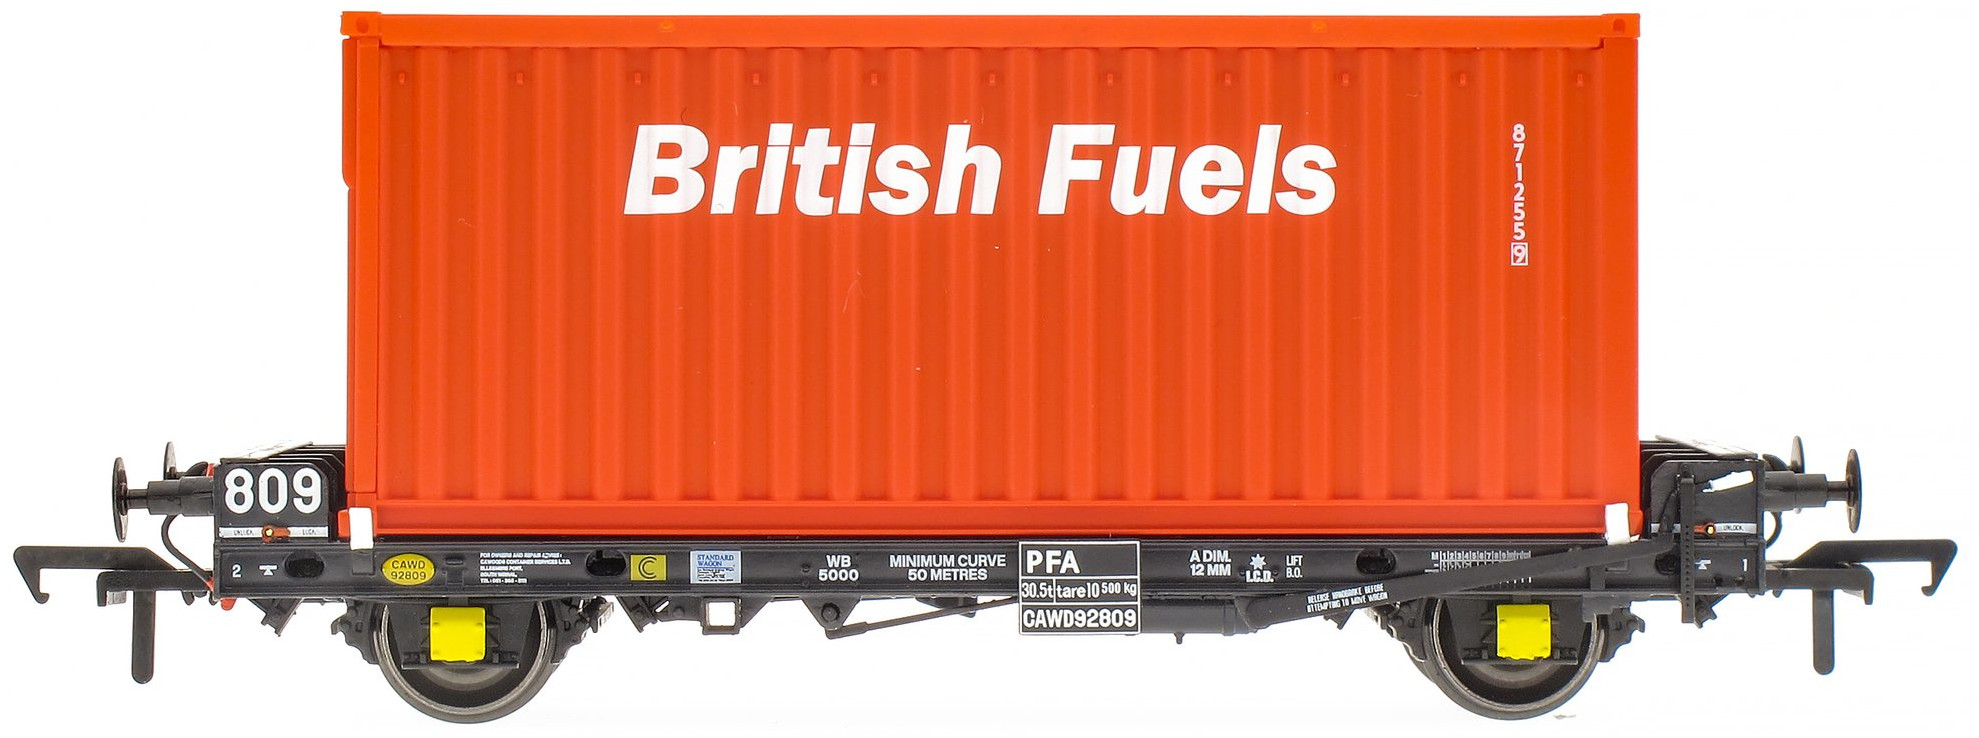 Accurascale ACC2068BFLH Flat British Fuels BFL92809 Image